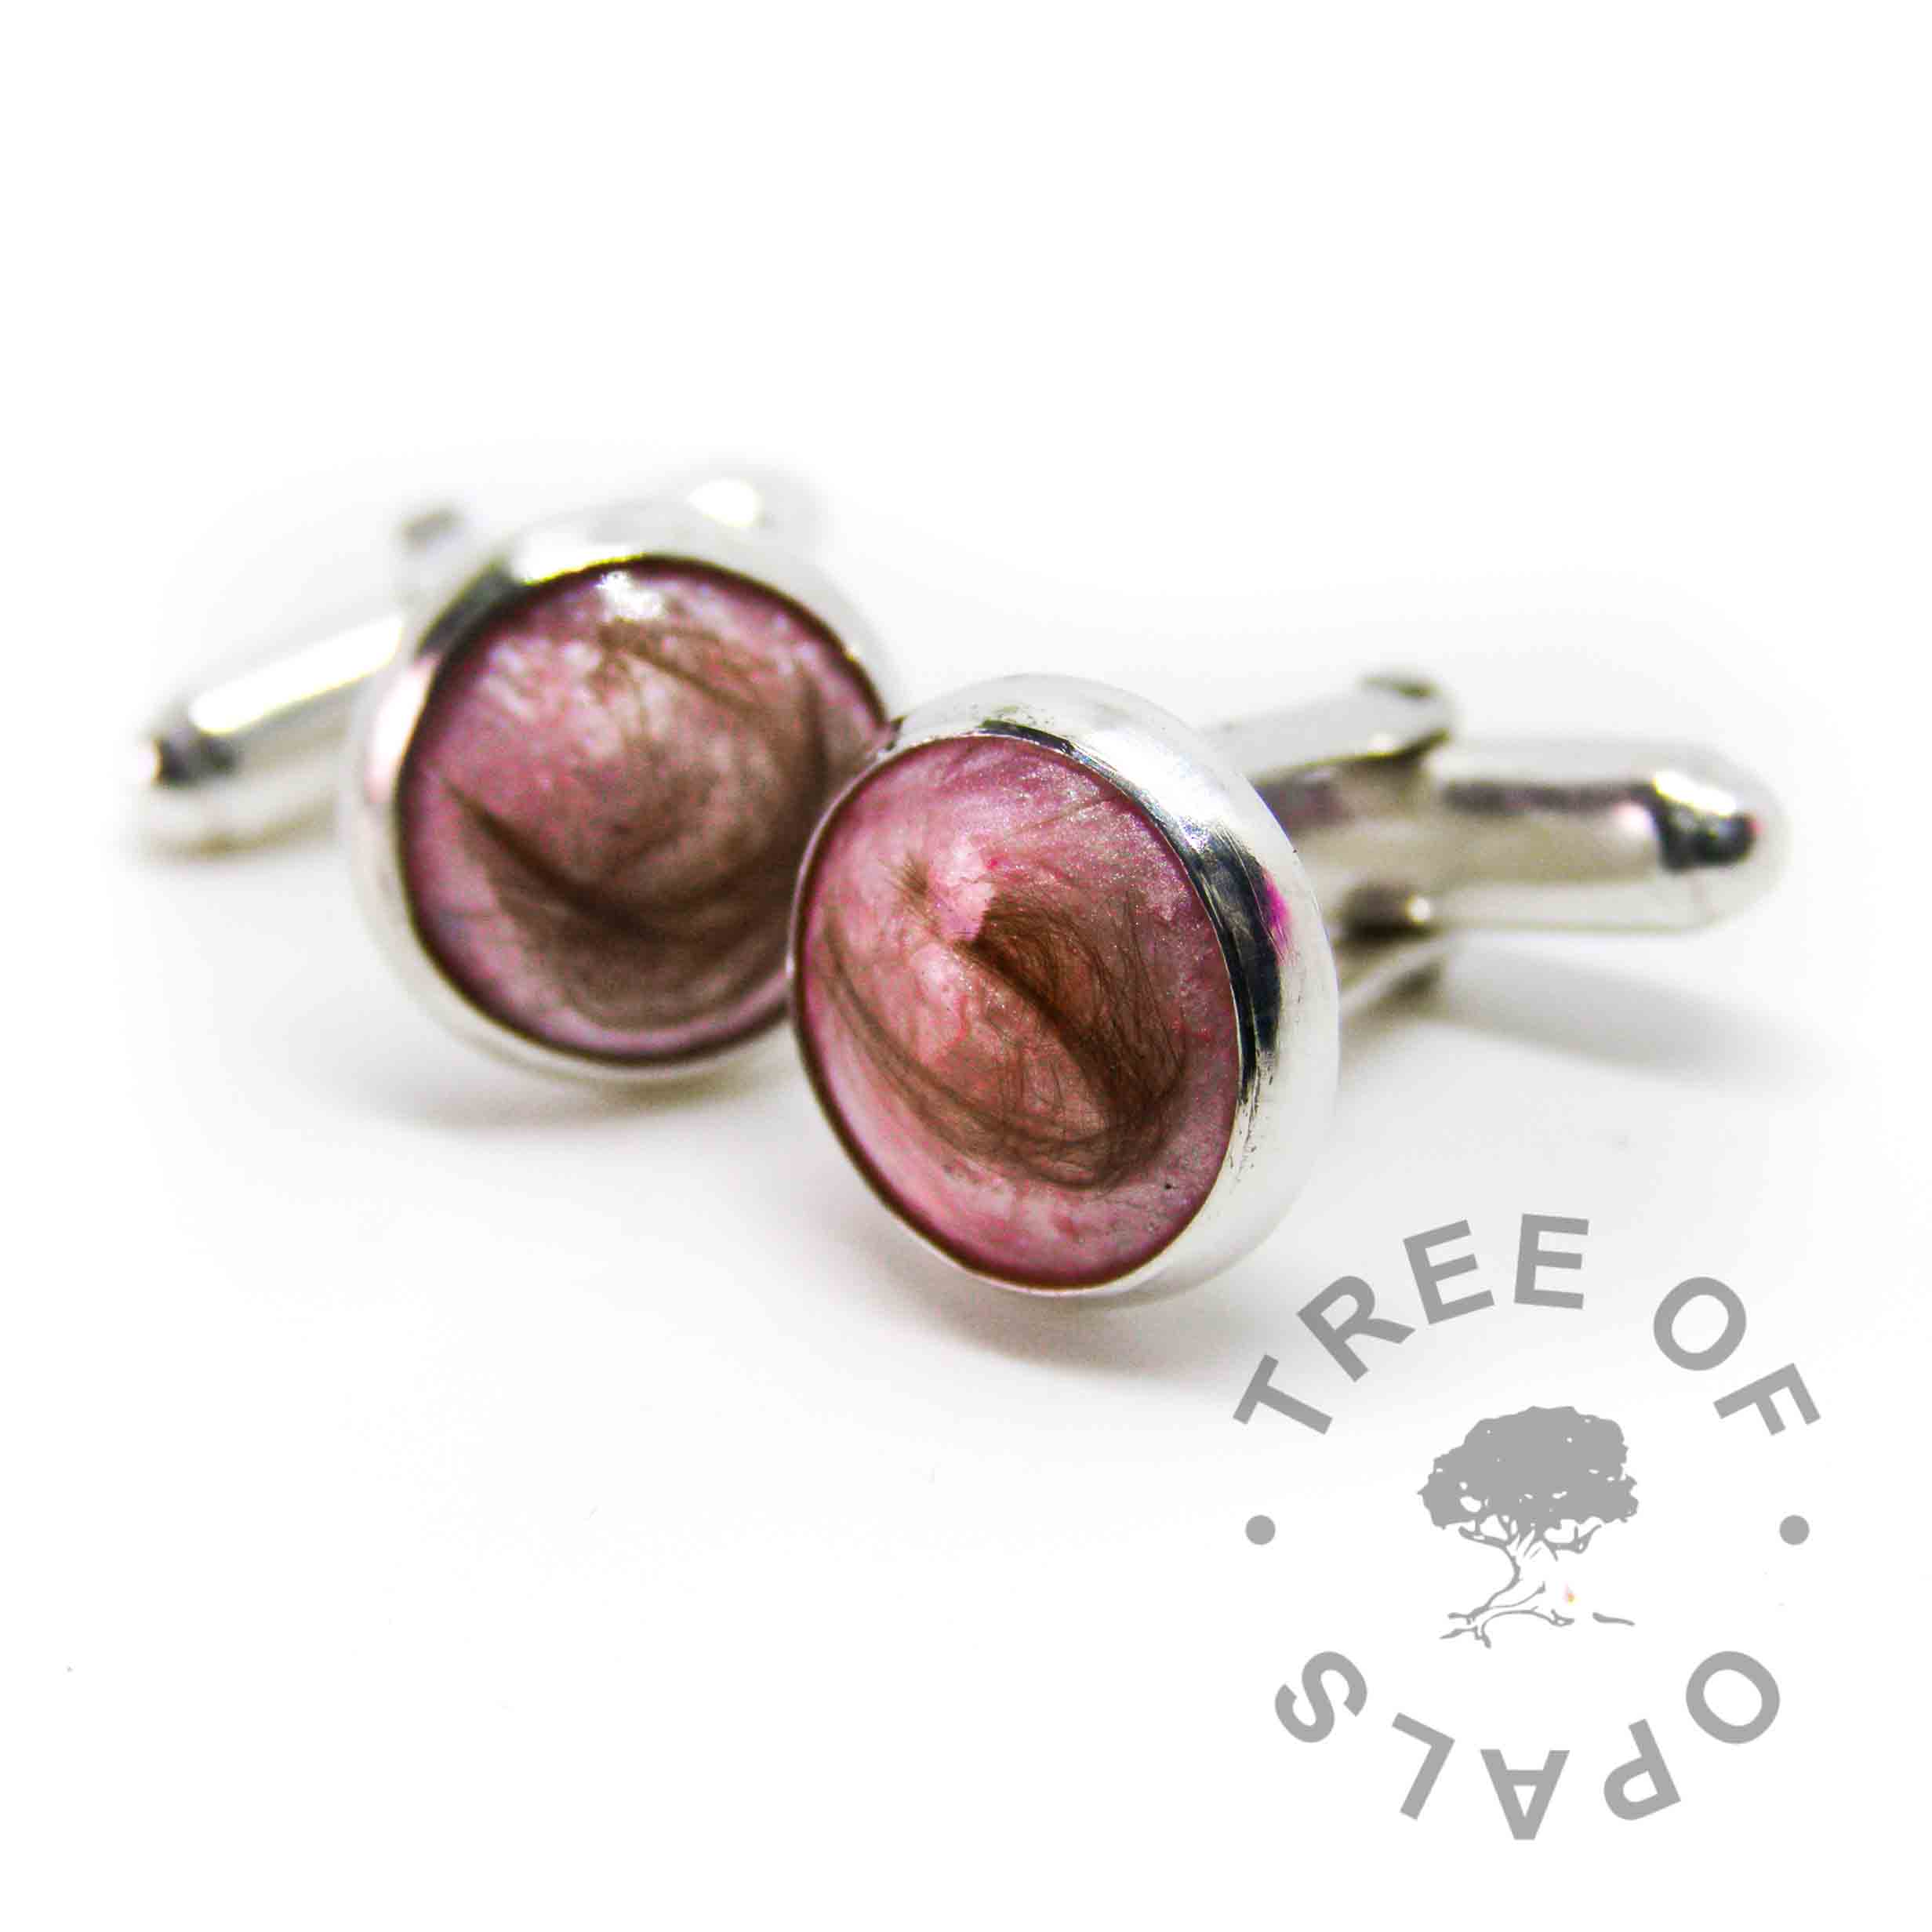 lock of hair cufflinks fairy pink sparkle in handmade solid sterling silver setting. *tw* baby hair memorial non-profit order, hair swirled round in the resin